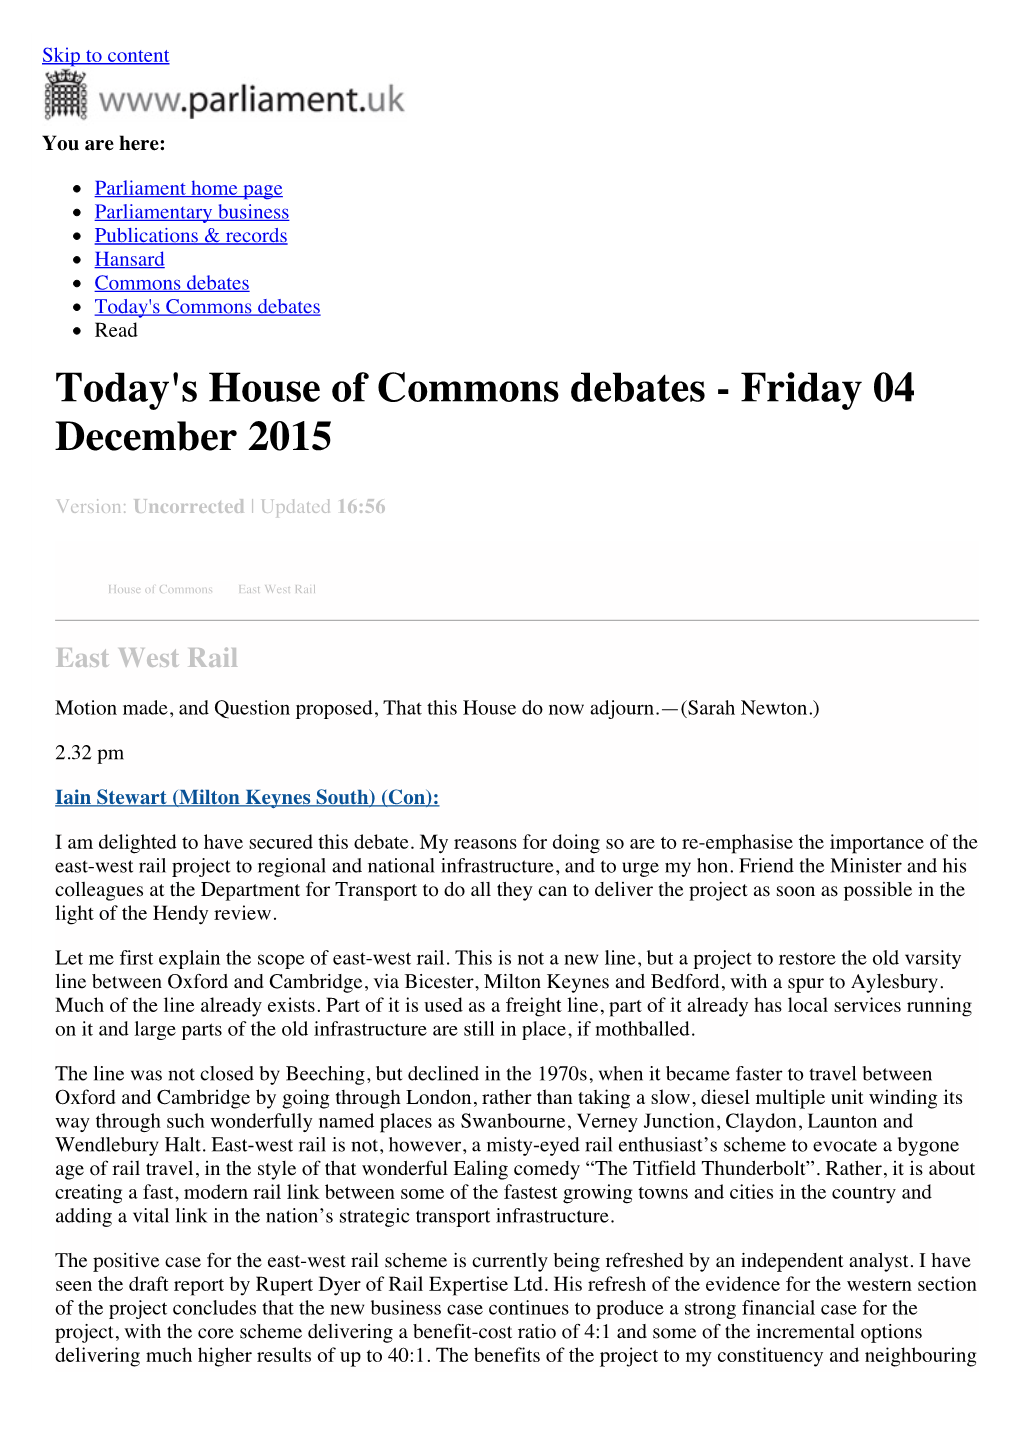 Read Today's House of Commons Debates - Friday 04 December 2015